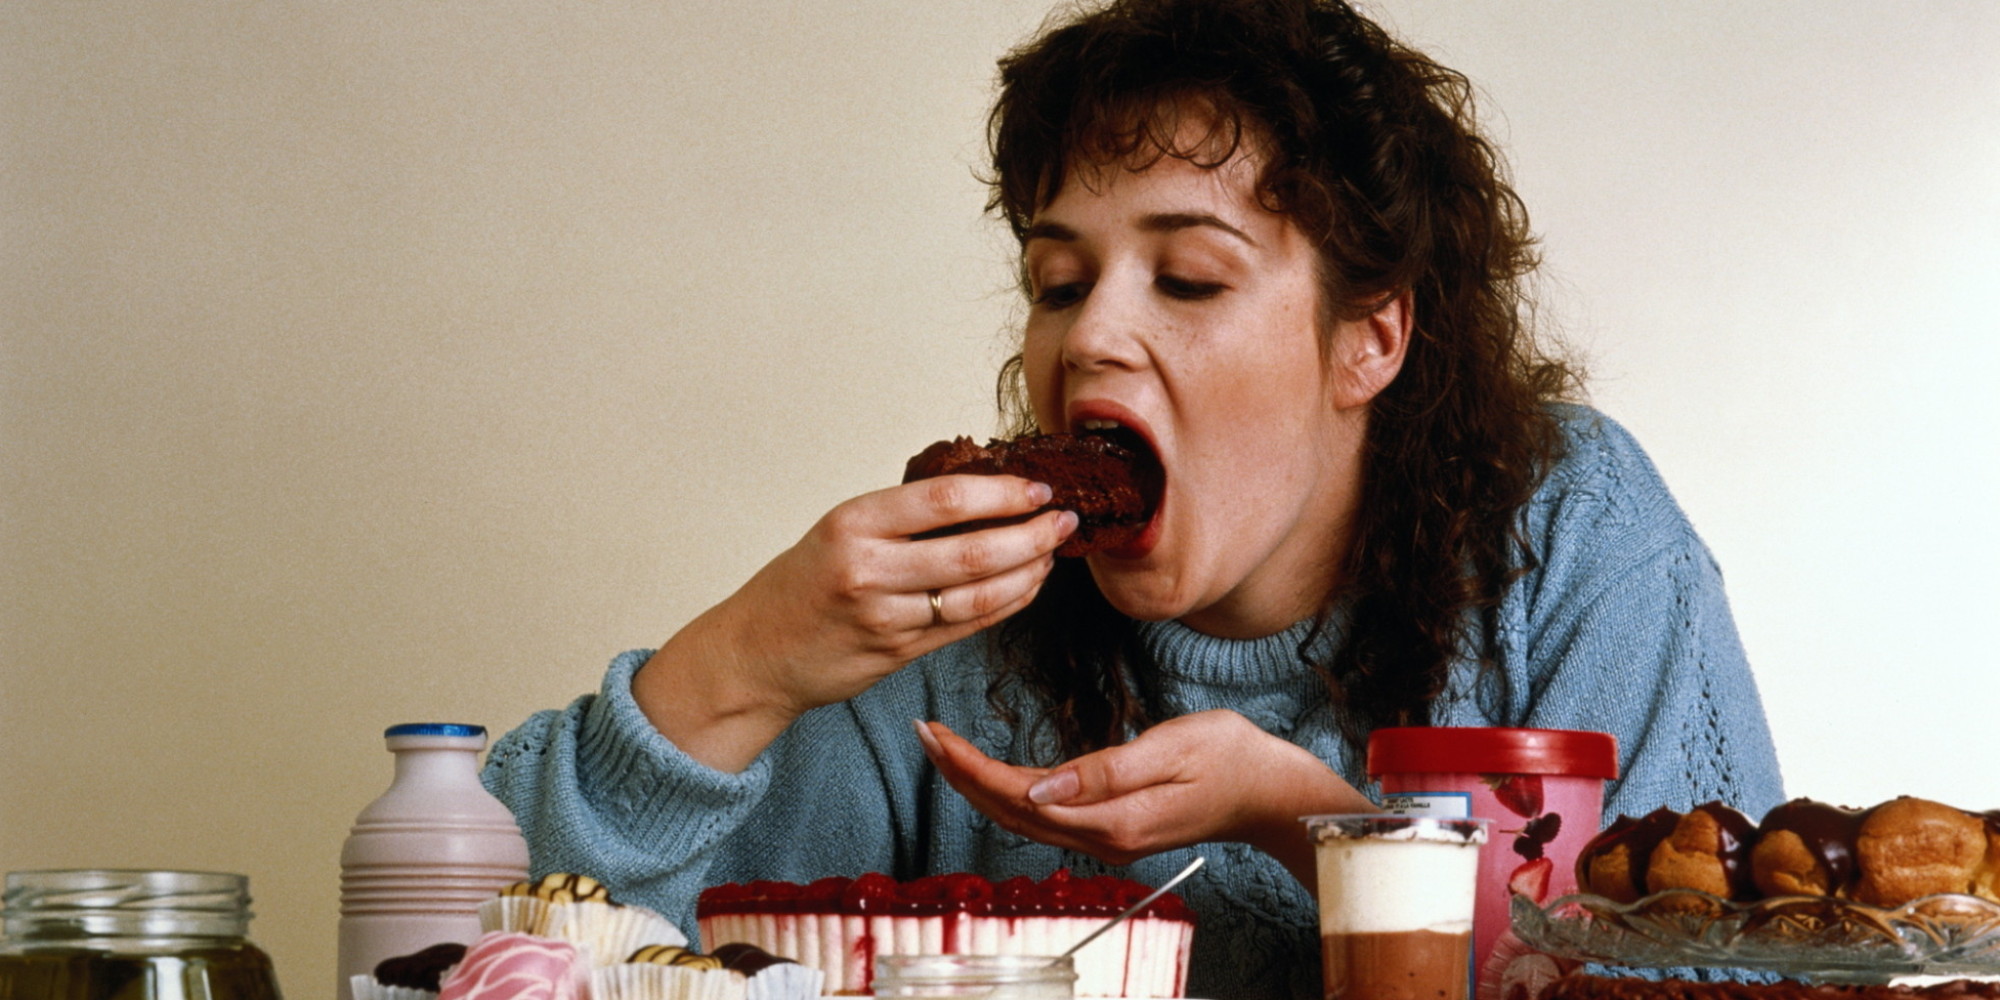 How To Curb Emotional Or Habitual Overeating Video Huffpost 